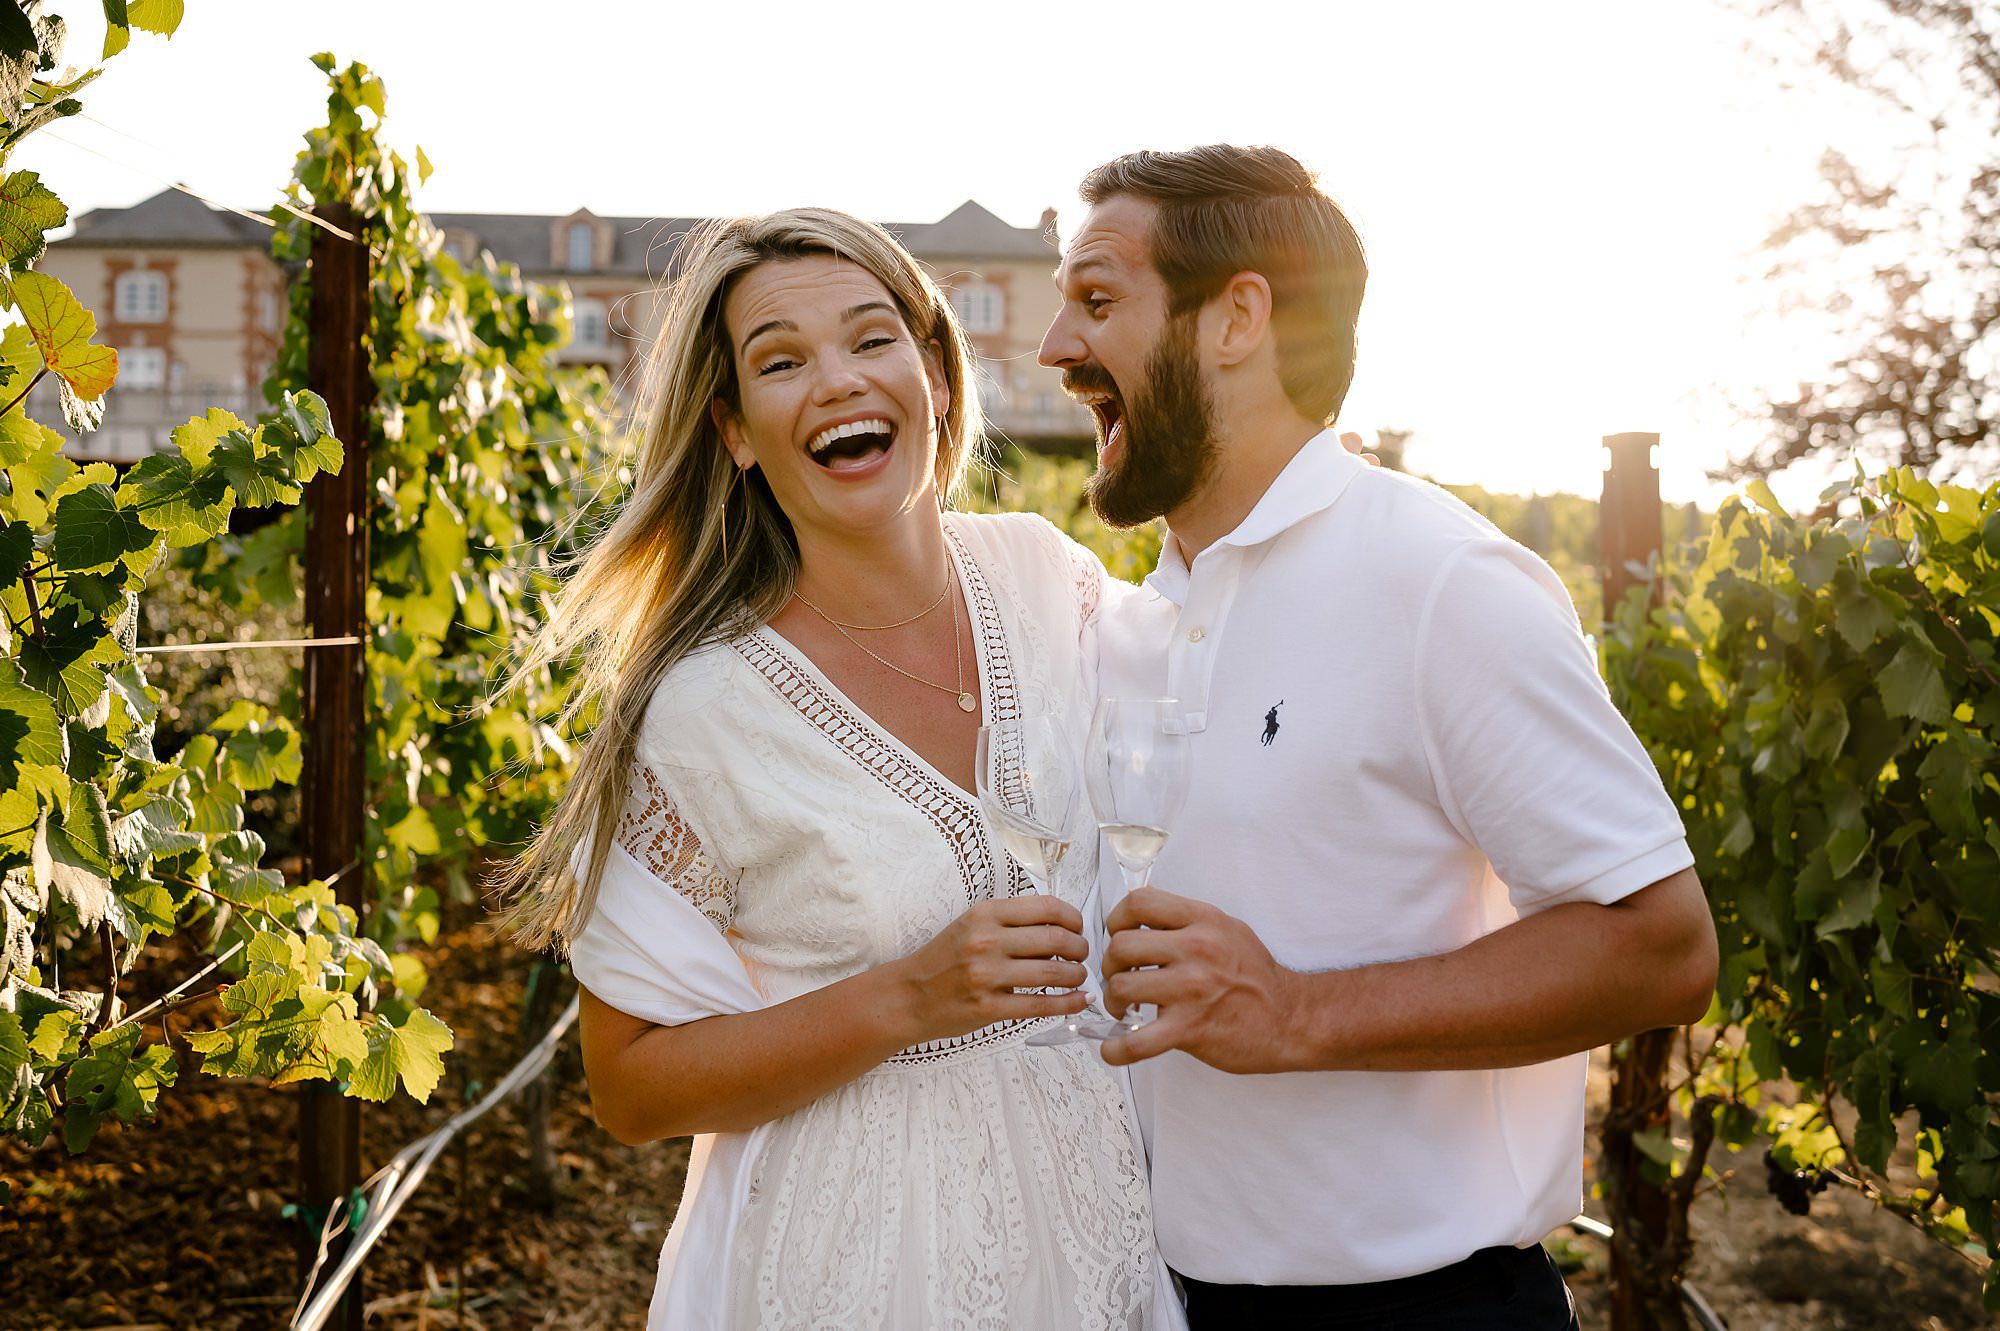 Cameron and Melissa laughing in the vineyard at Domaine Carneros in Napa.